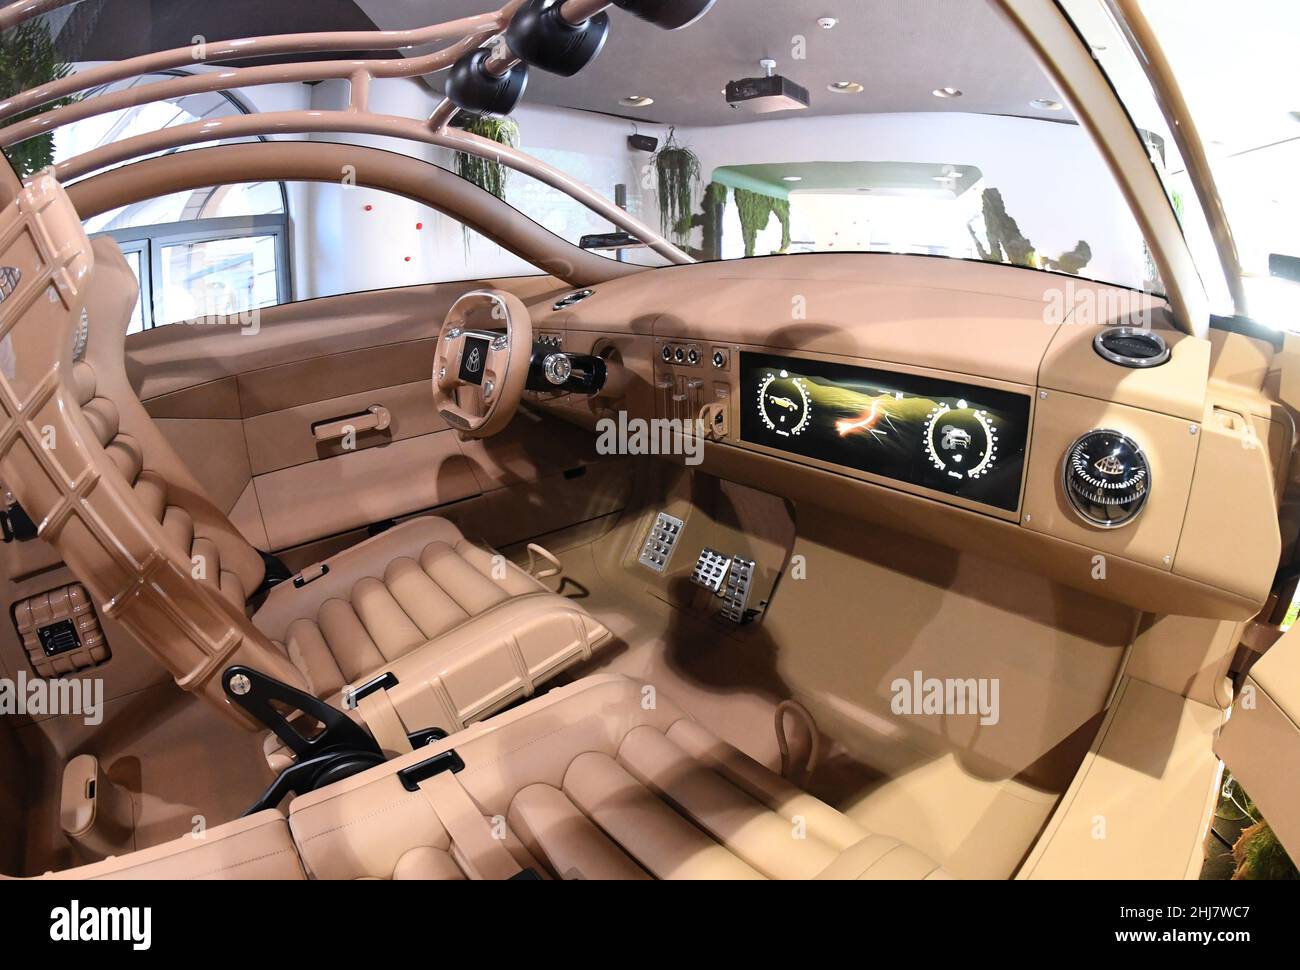 Inside One of Virgil Abloh's Final Designs—A Mercedes-Maybach